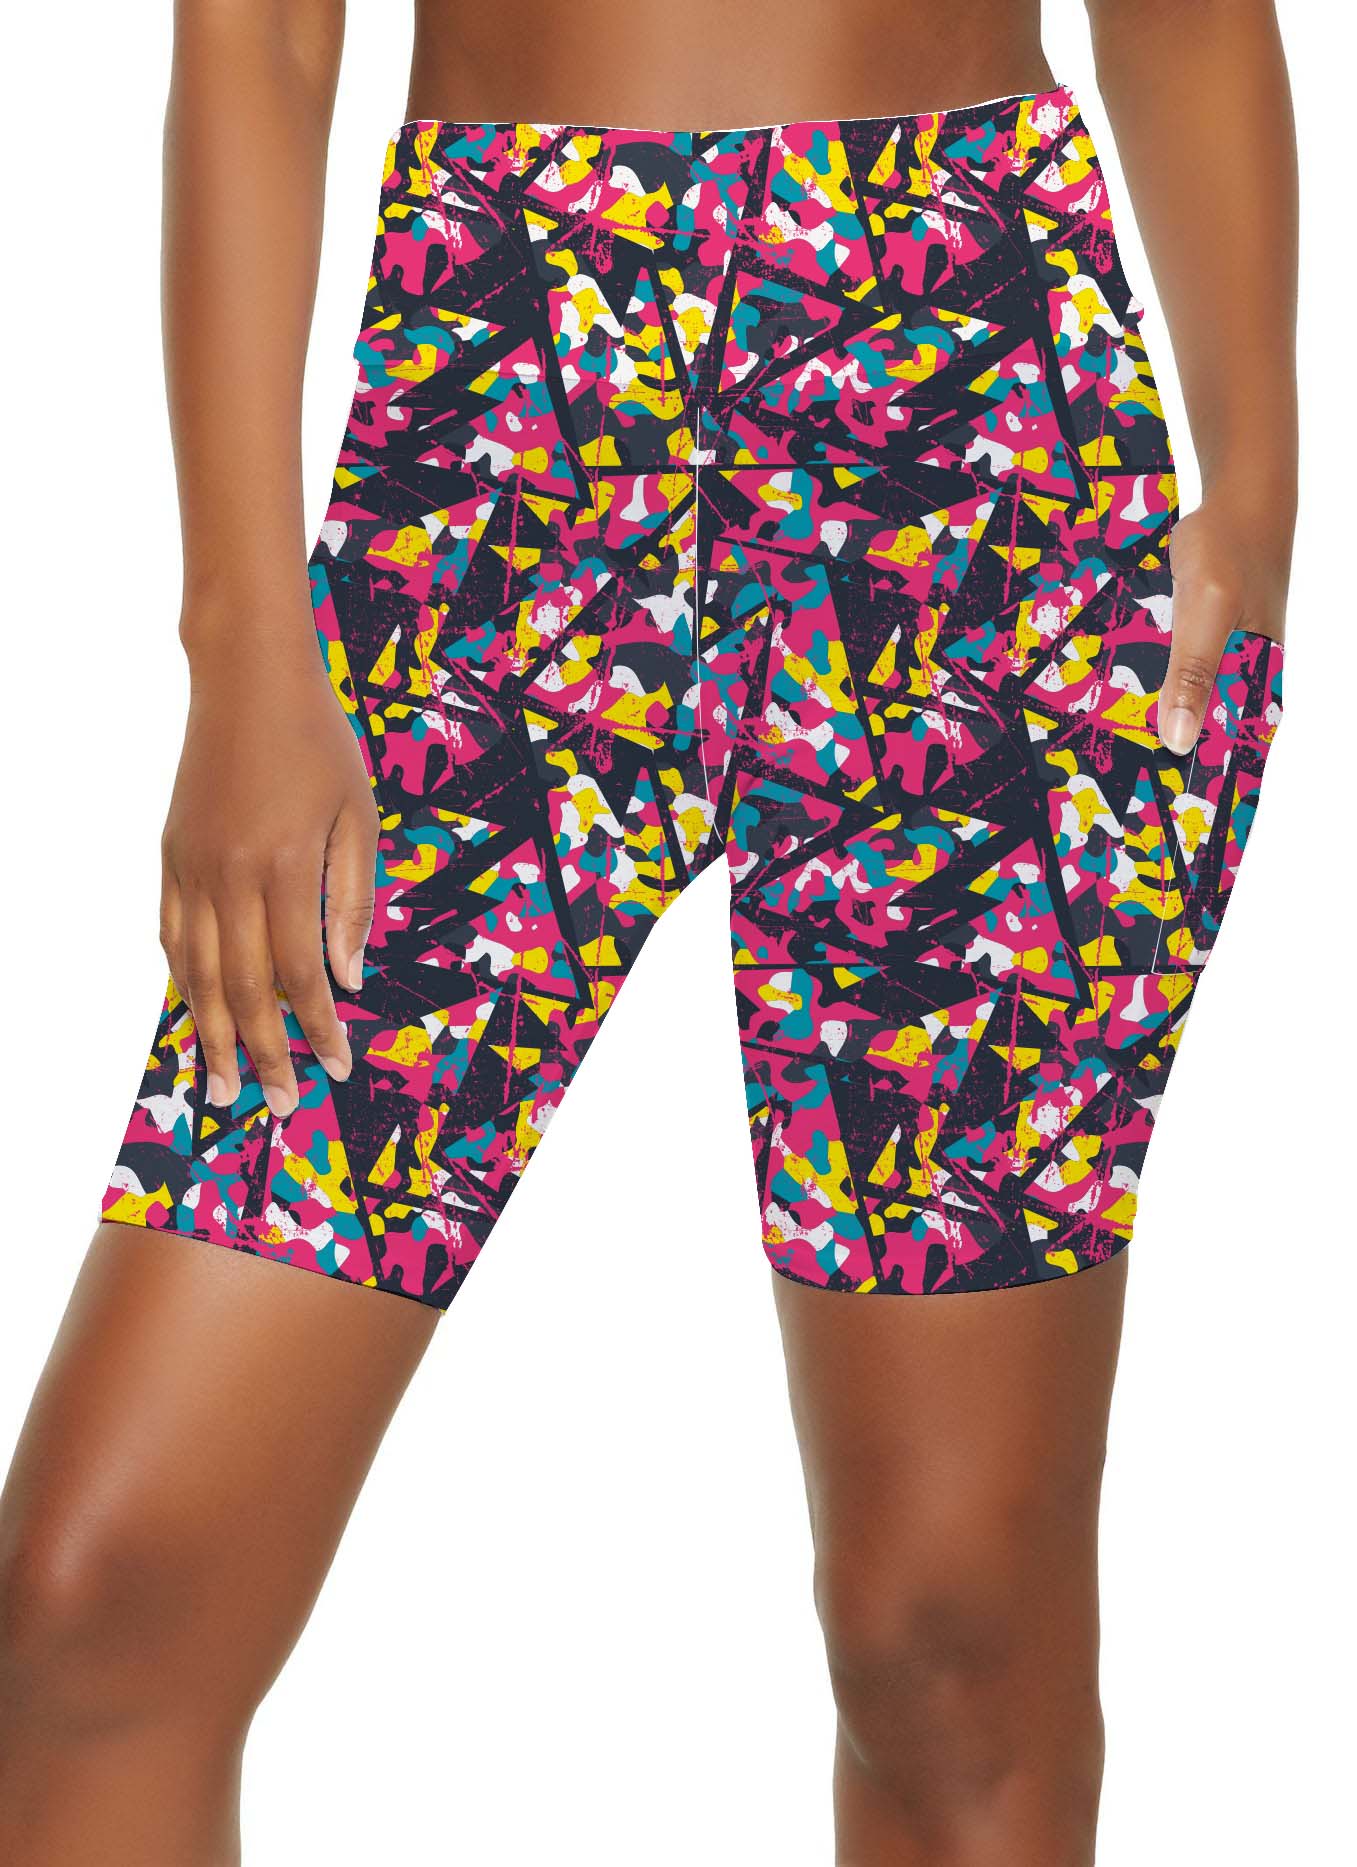 PLUS PATTERNED BIKE SHORTS WITH POCKETS